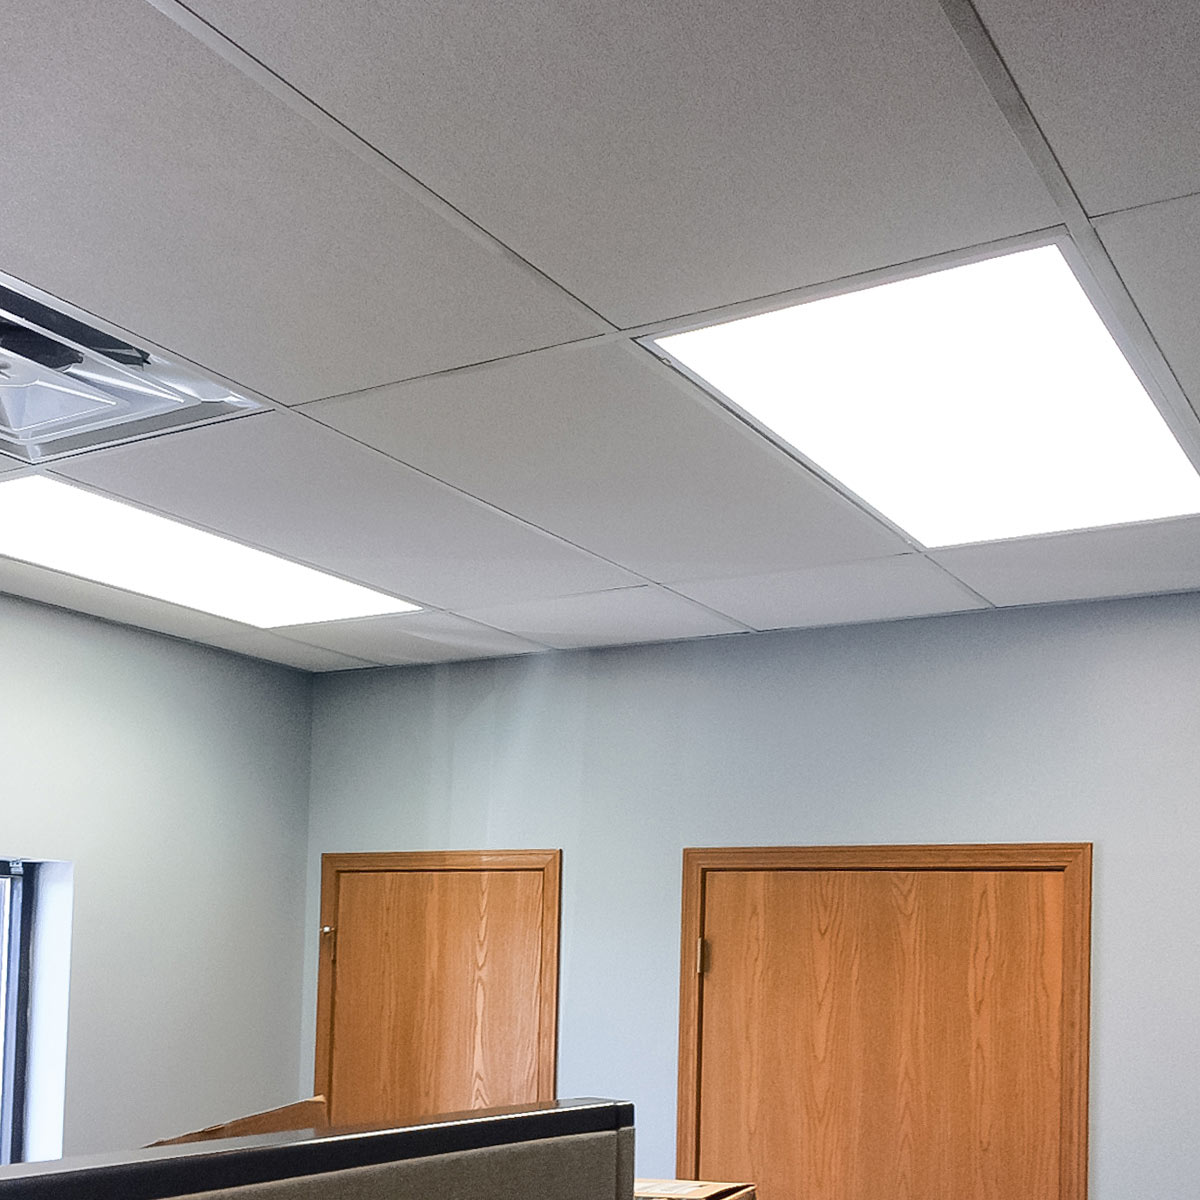 Acoustitherm Insulated Acoustic Ceiling Tiles Acoustical Solutions